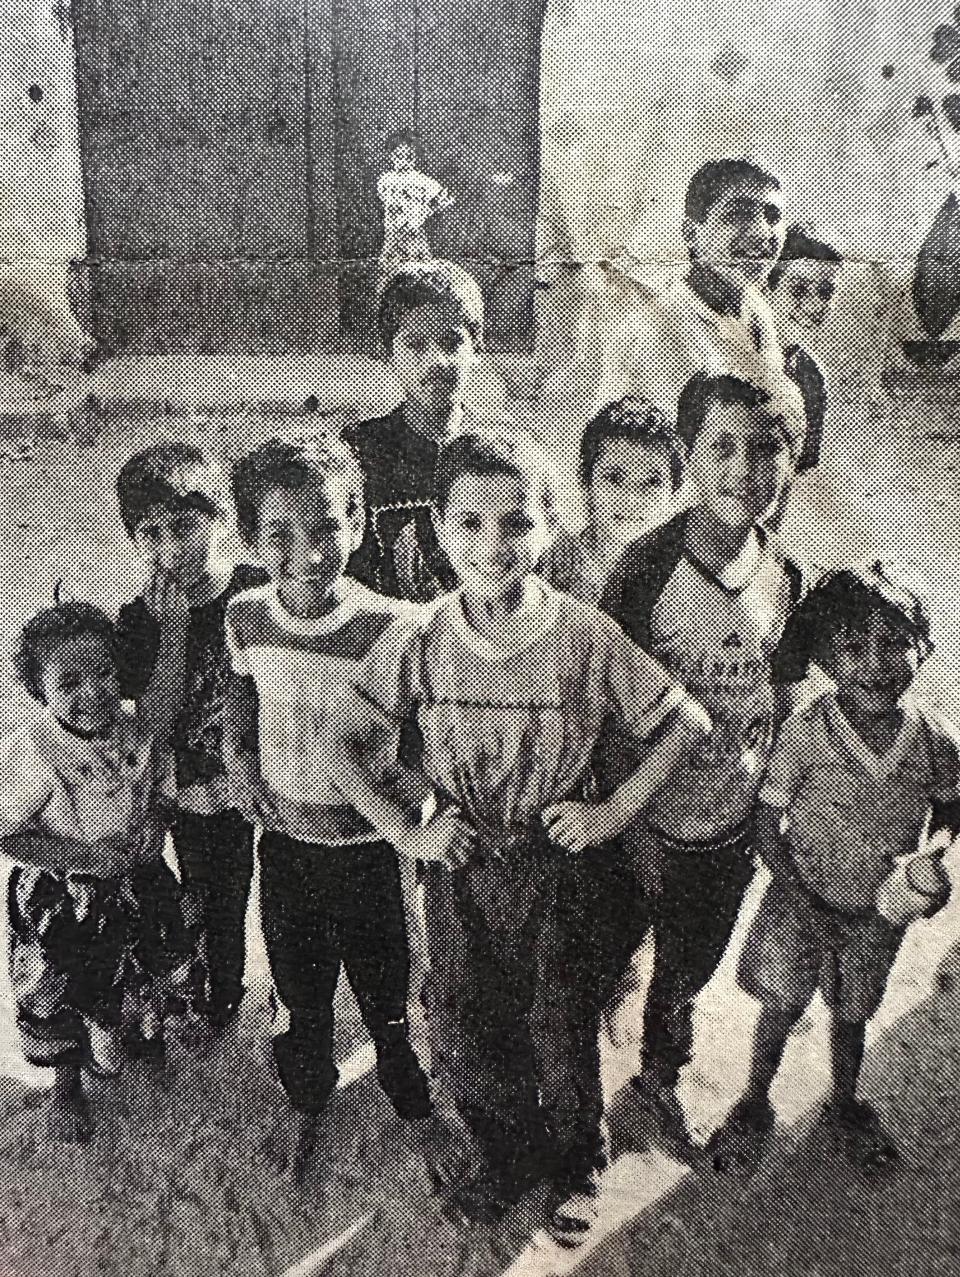 A group of boys Mark Patinkin stopped to talk with in Gaza in 1991.